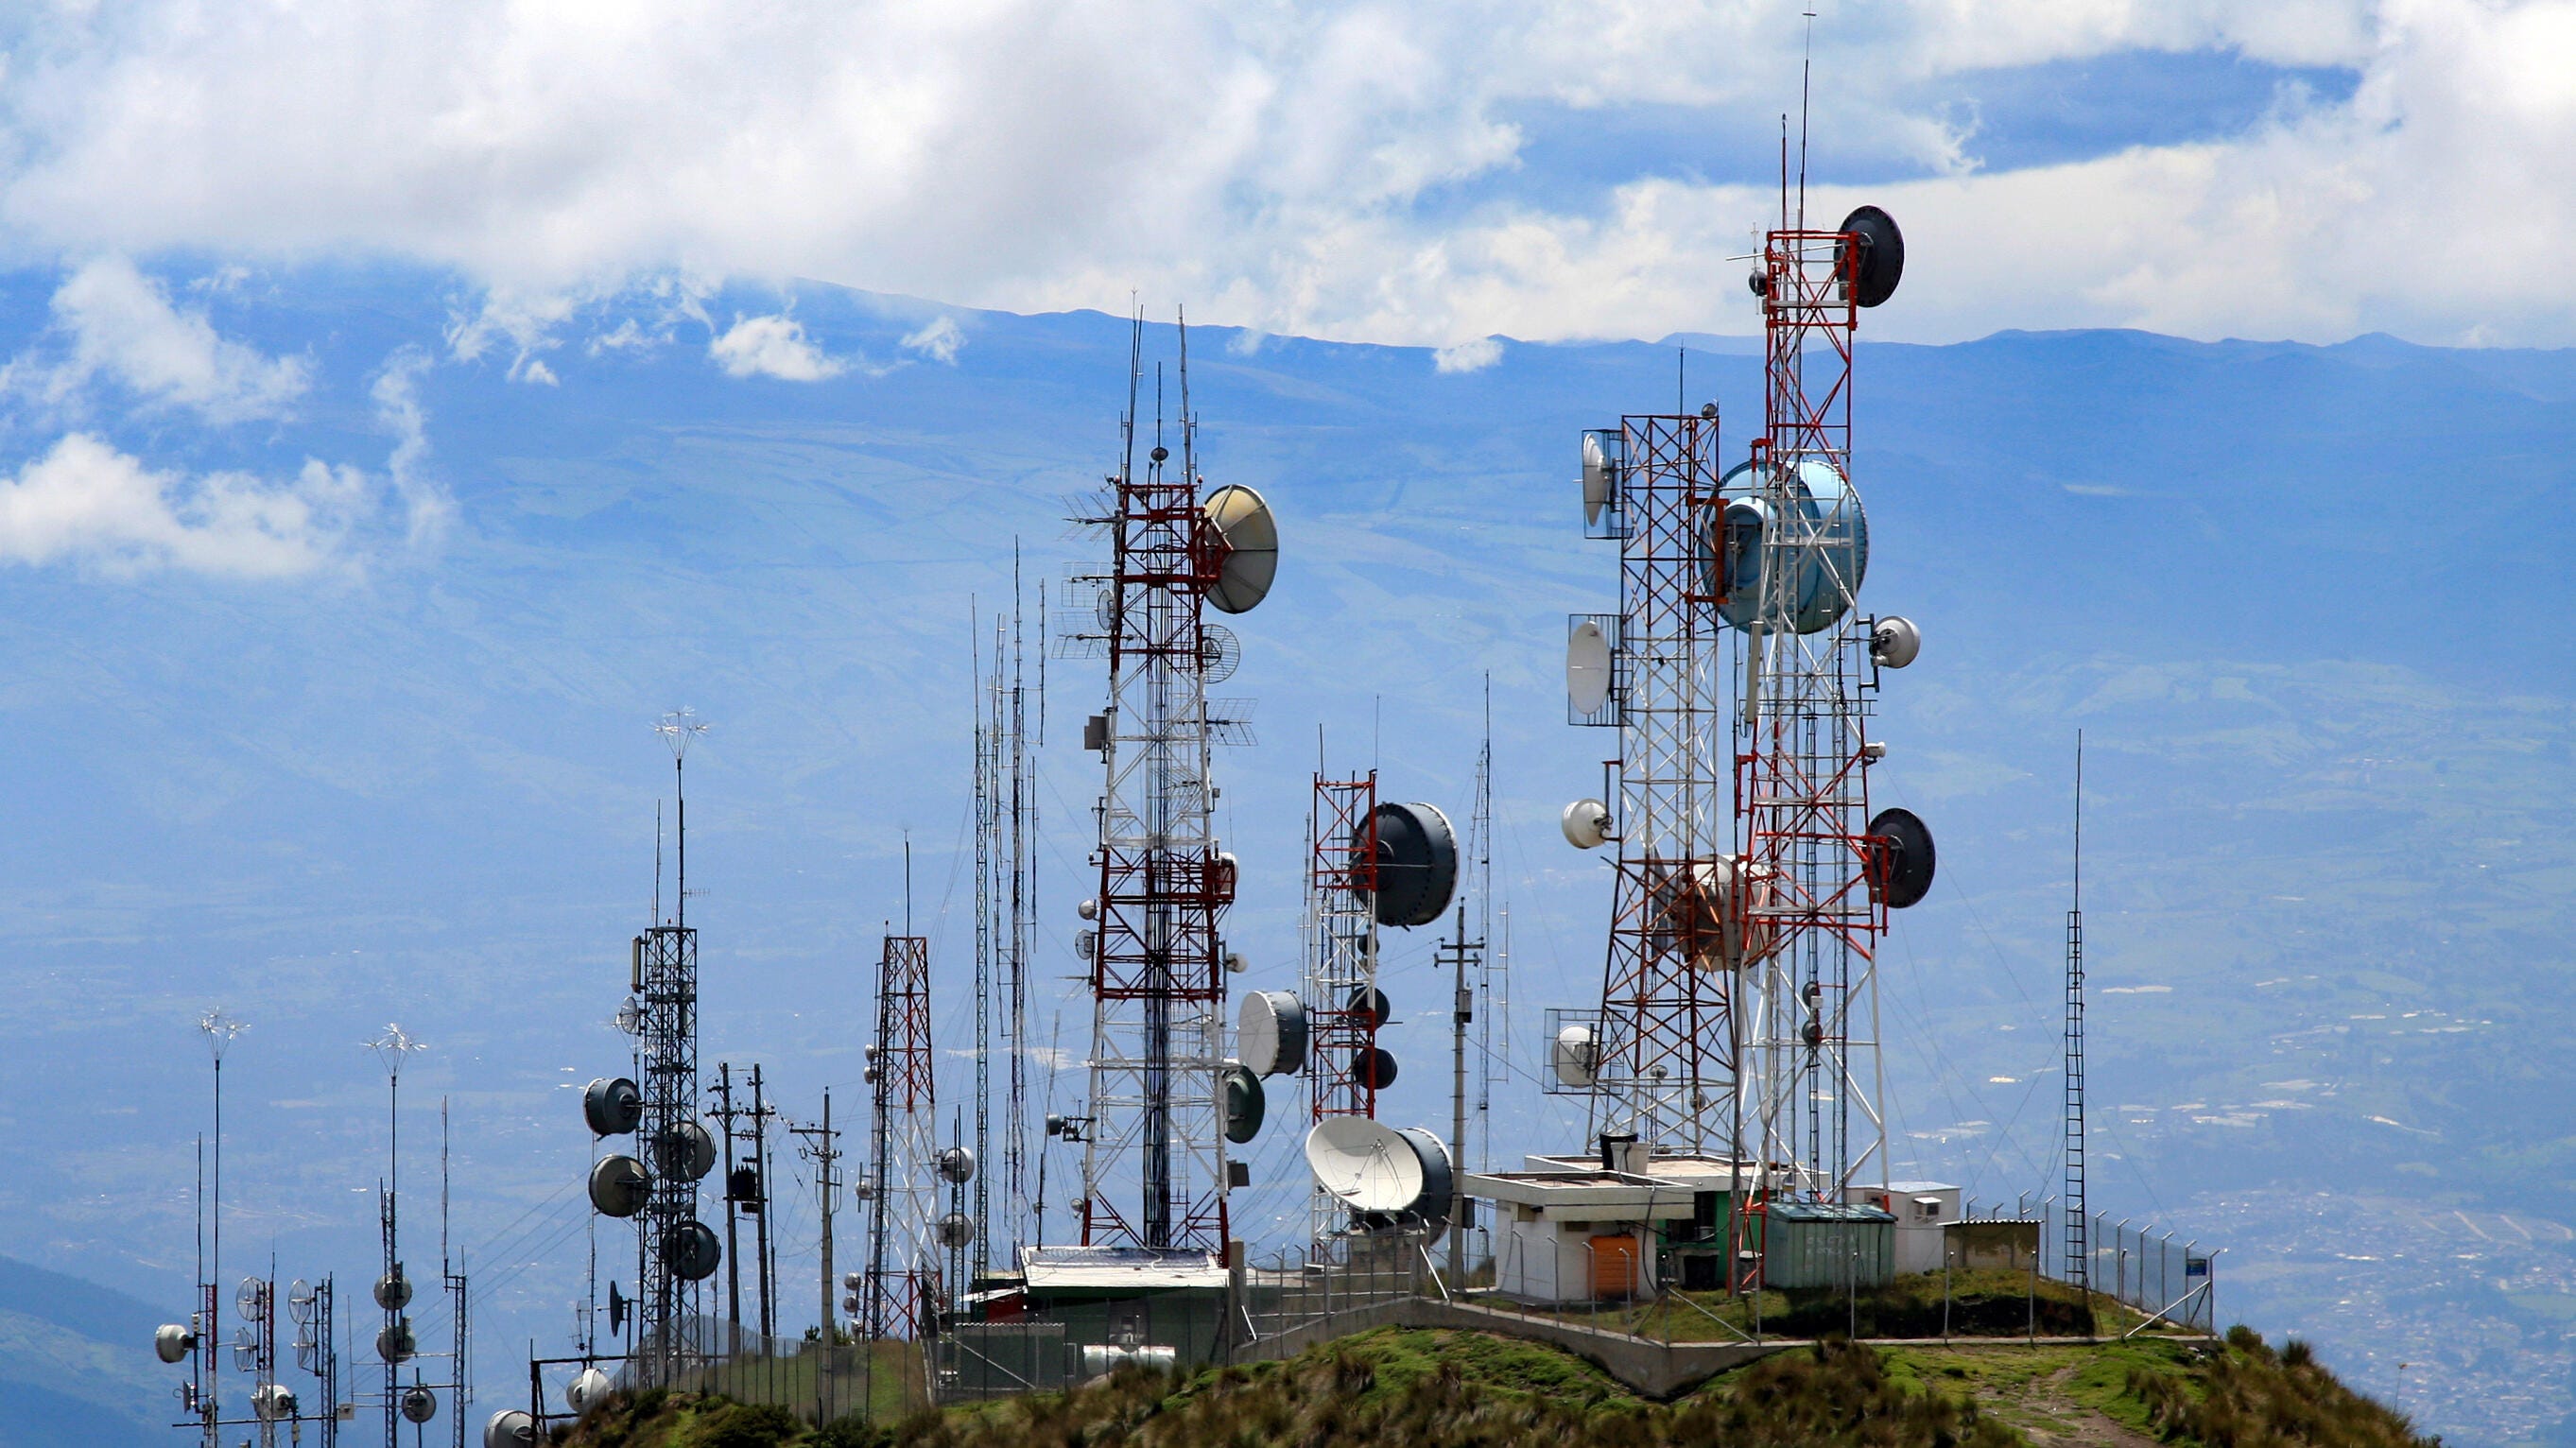 Tall towers with myriad antennae sit perched on a mountaintop.  More mountains are in the distance.